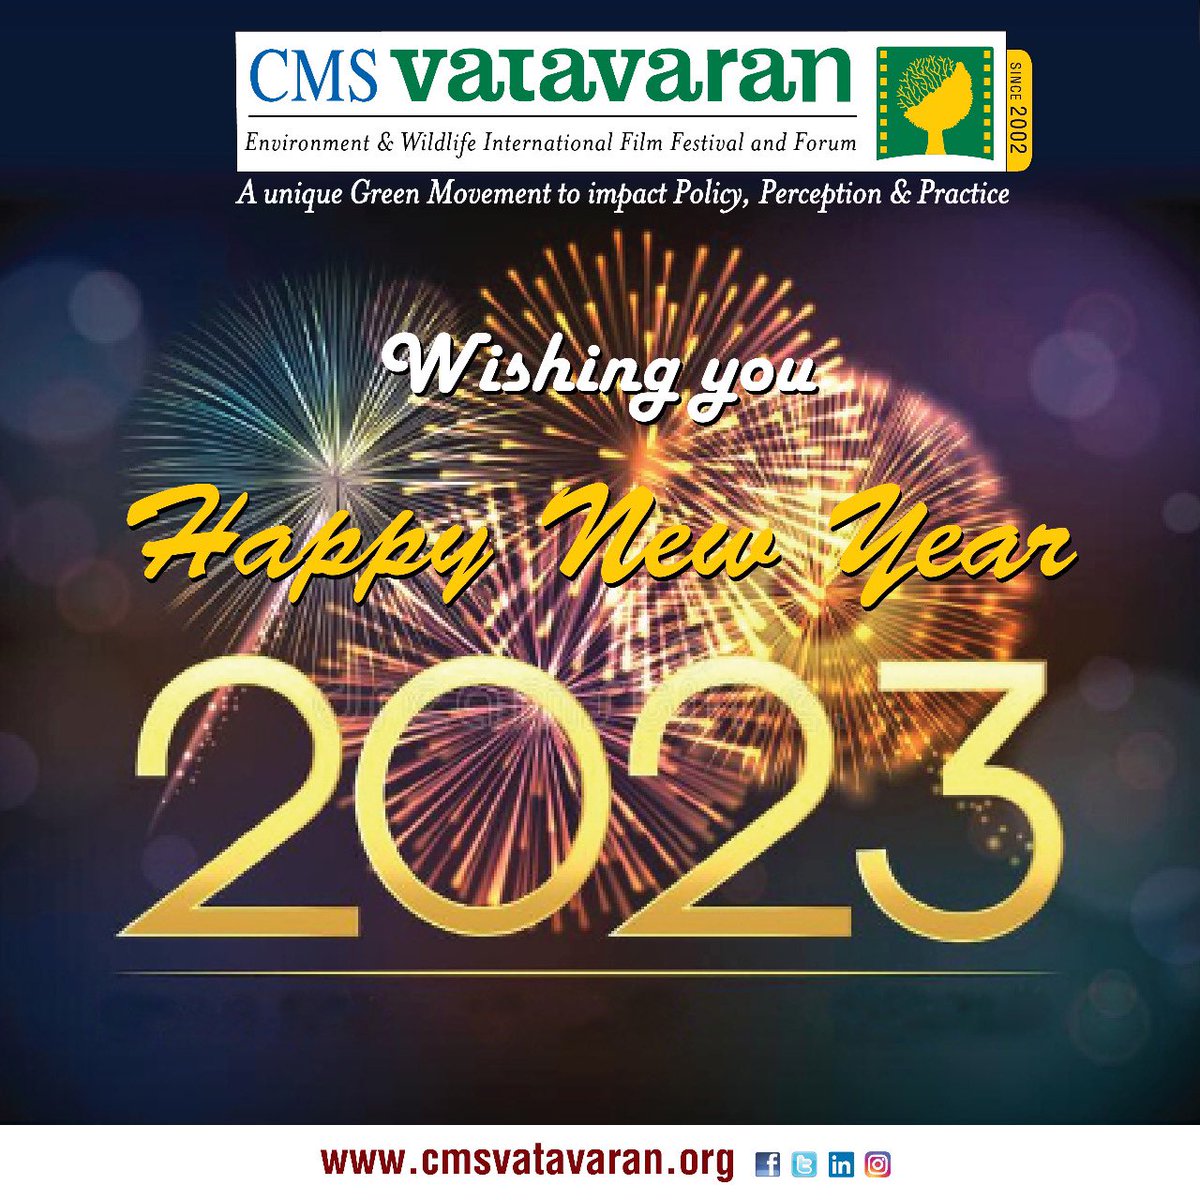 #HappyNewYear2023 and thank you for your continued support! CMS VATAVARAN family wishes you peace, health and happiness for this new year. May 2023 be a year of #hope, #love& #peace!
#seasonsgreetings #newyear2023 @pnvcms @Researchouse @moefcc @IUCN_CEC @GreenFilmNet @sabyesachi